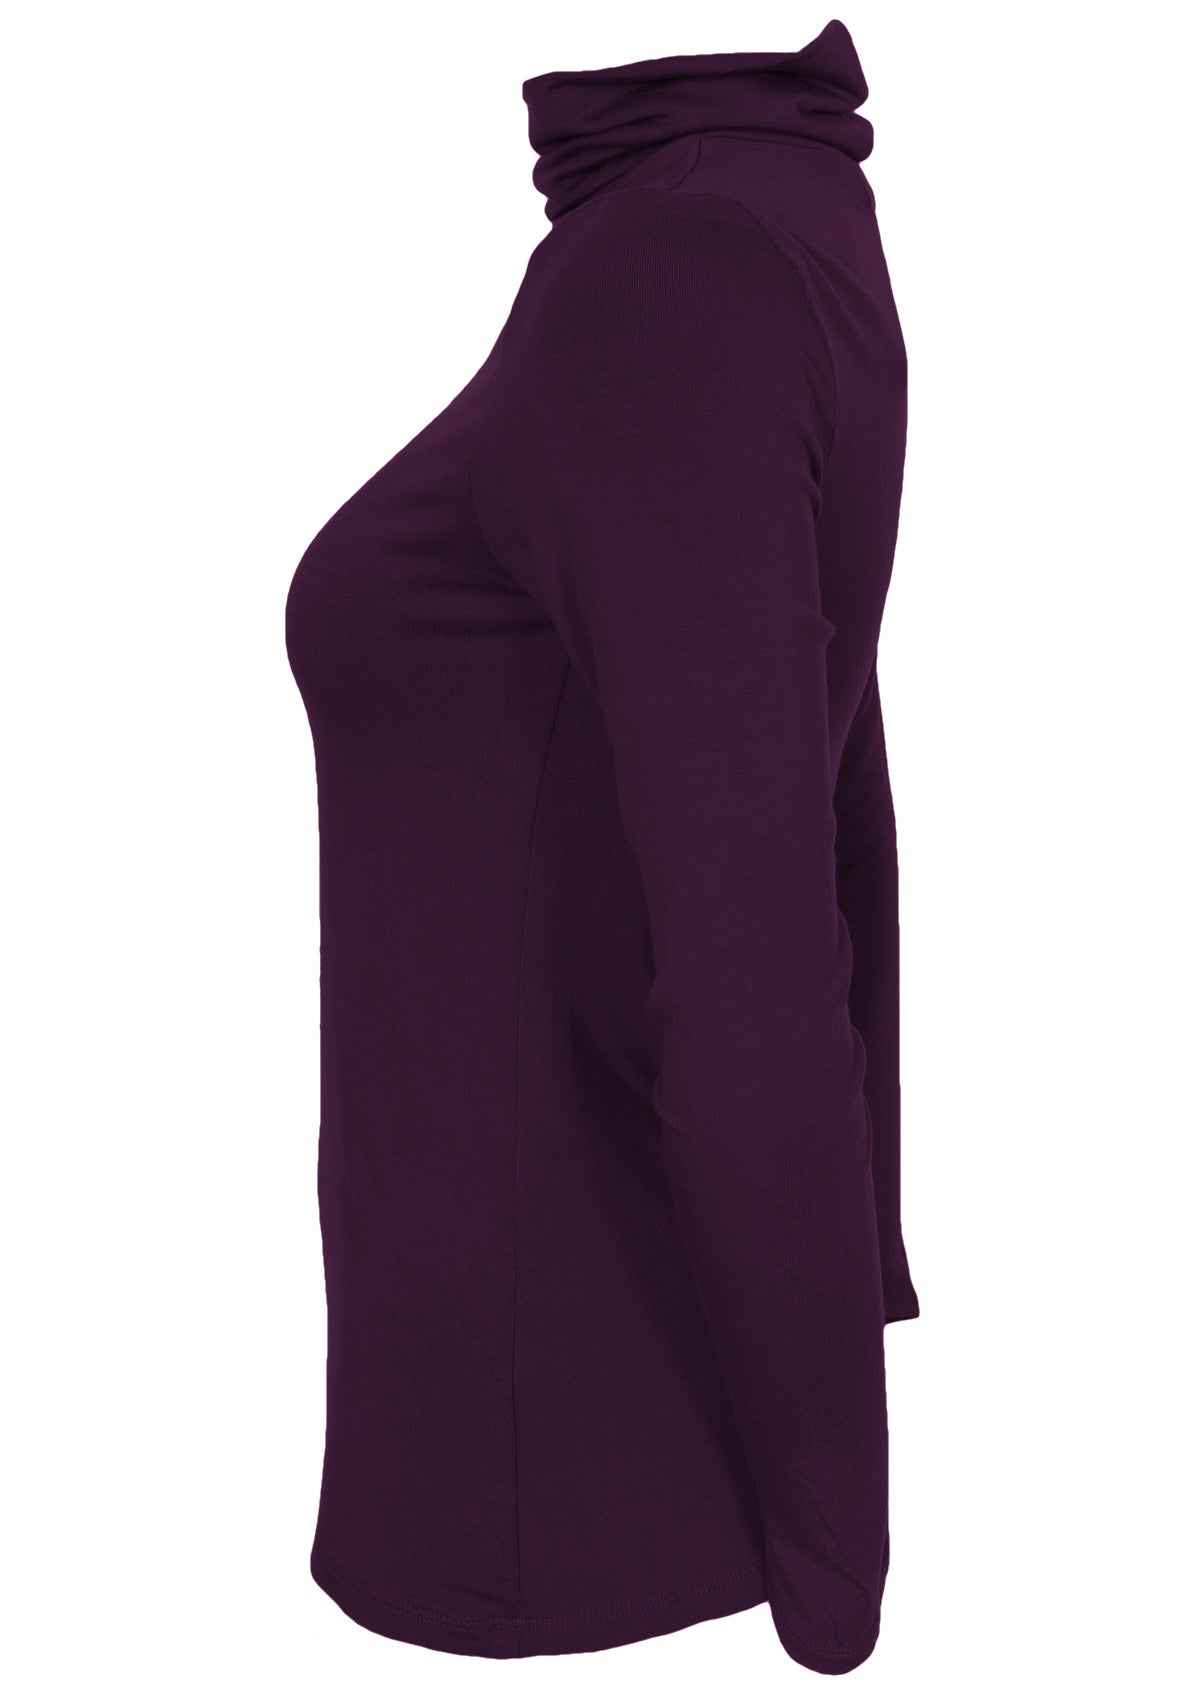 Side view of women's turtle neck purple fitted long sleeve soft stretch rayon top.